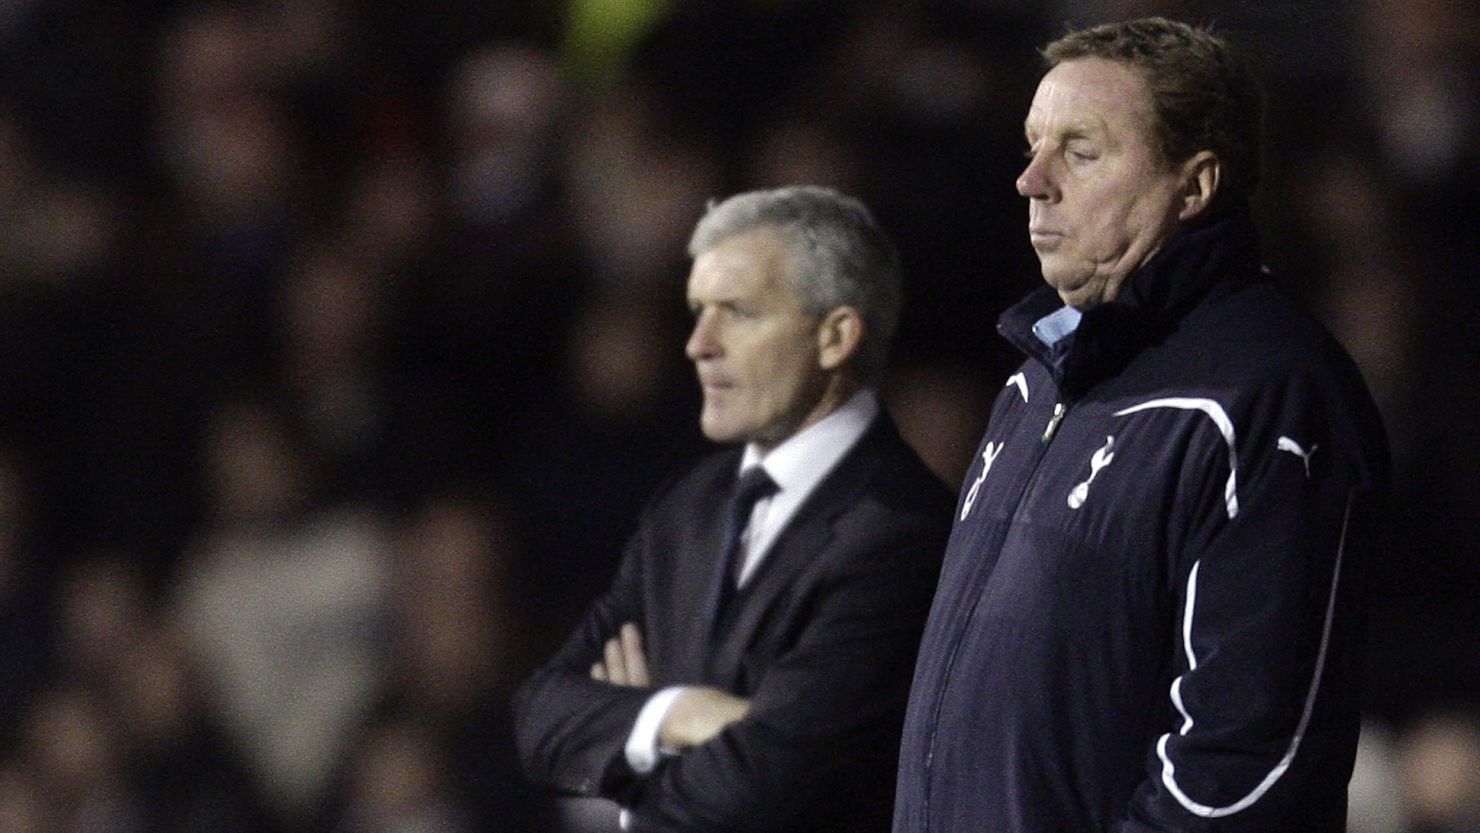 Harry Redknapp is set to replace Mark Hughes as the new manager of Queens Park Rangers